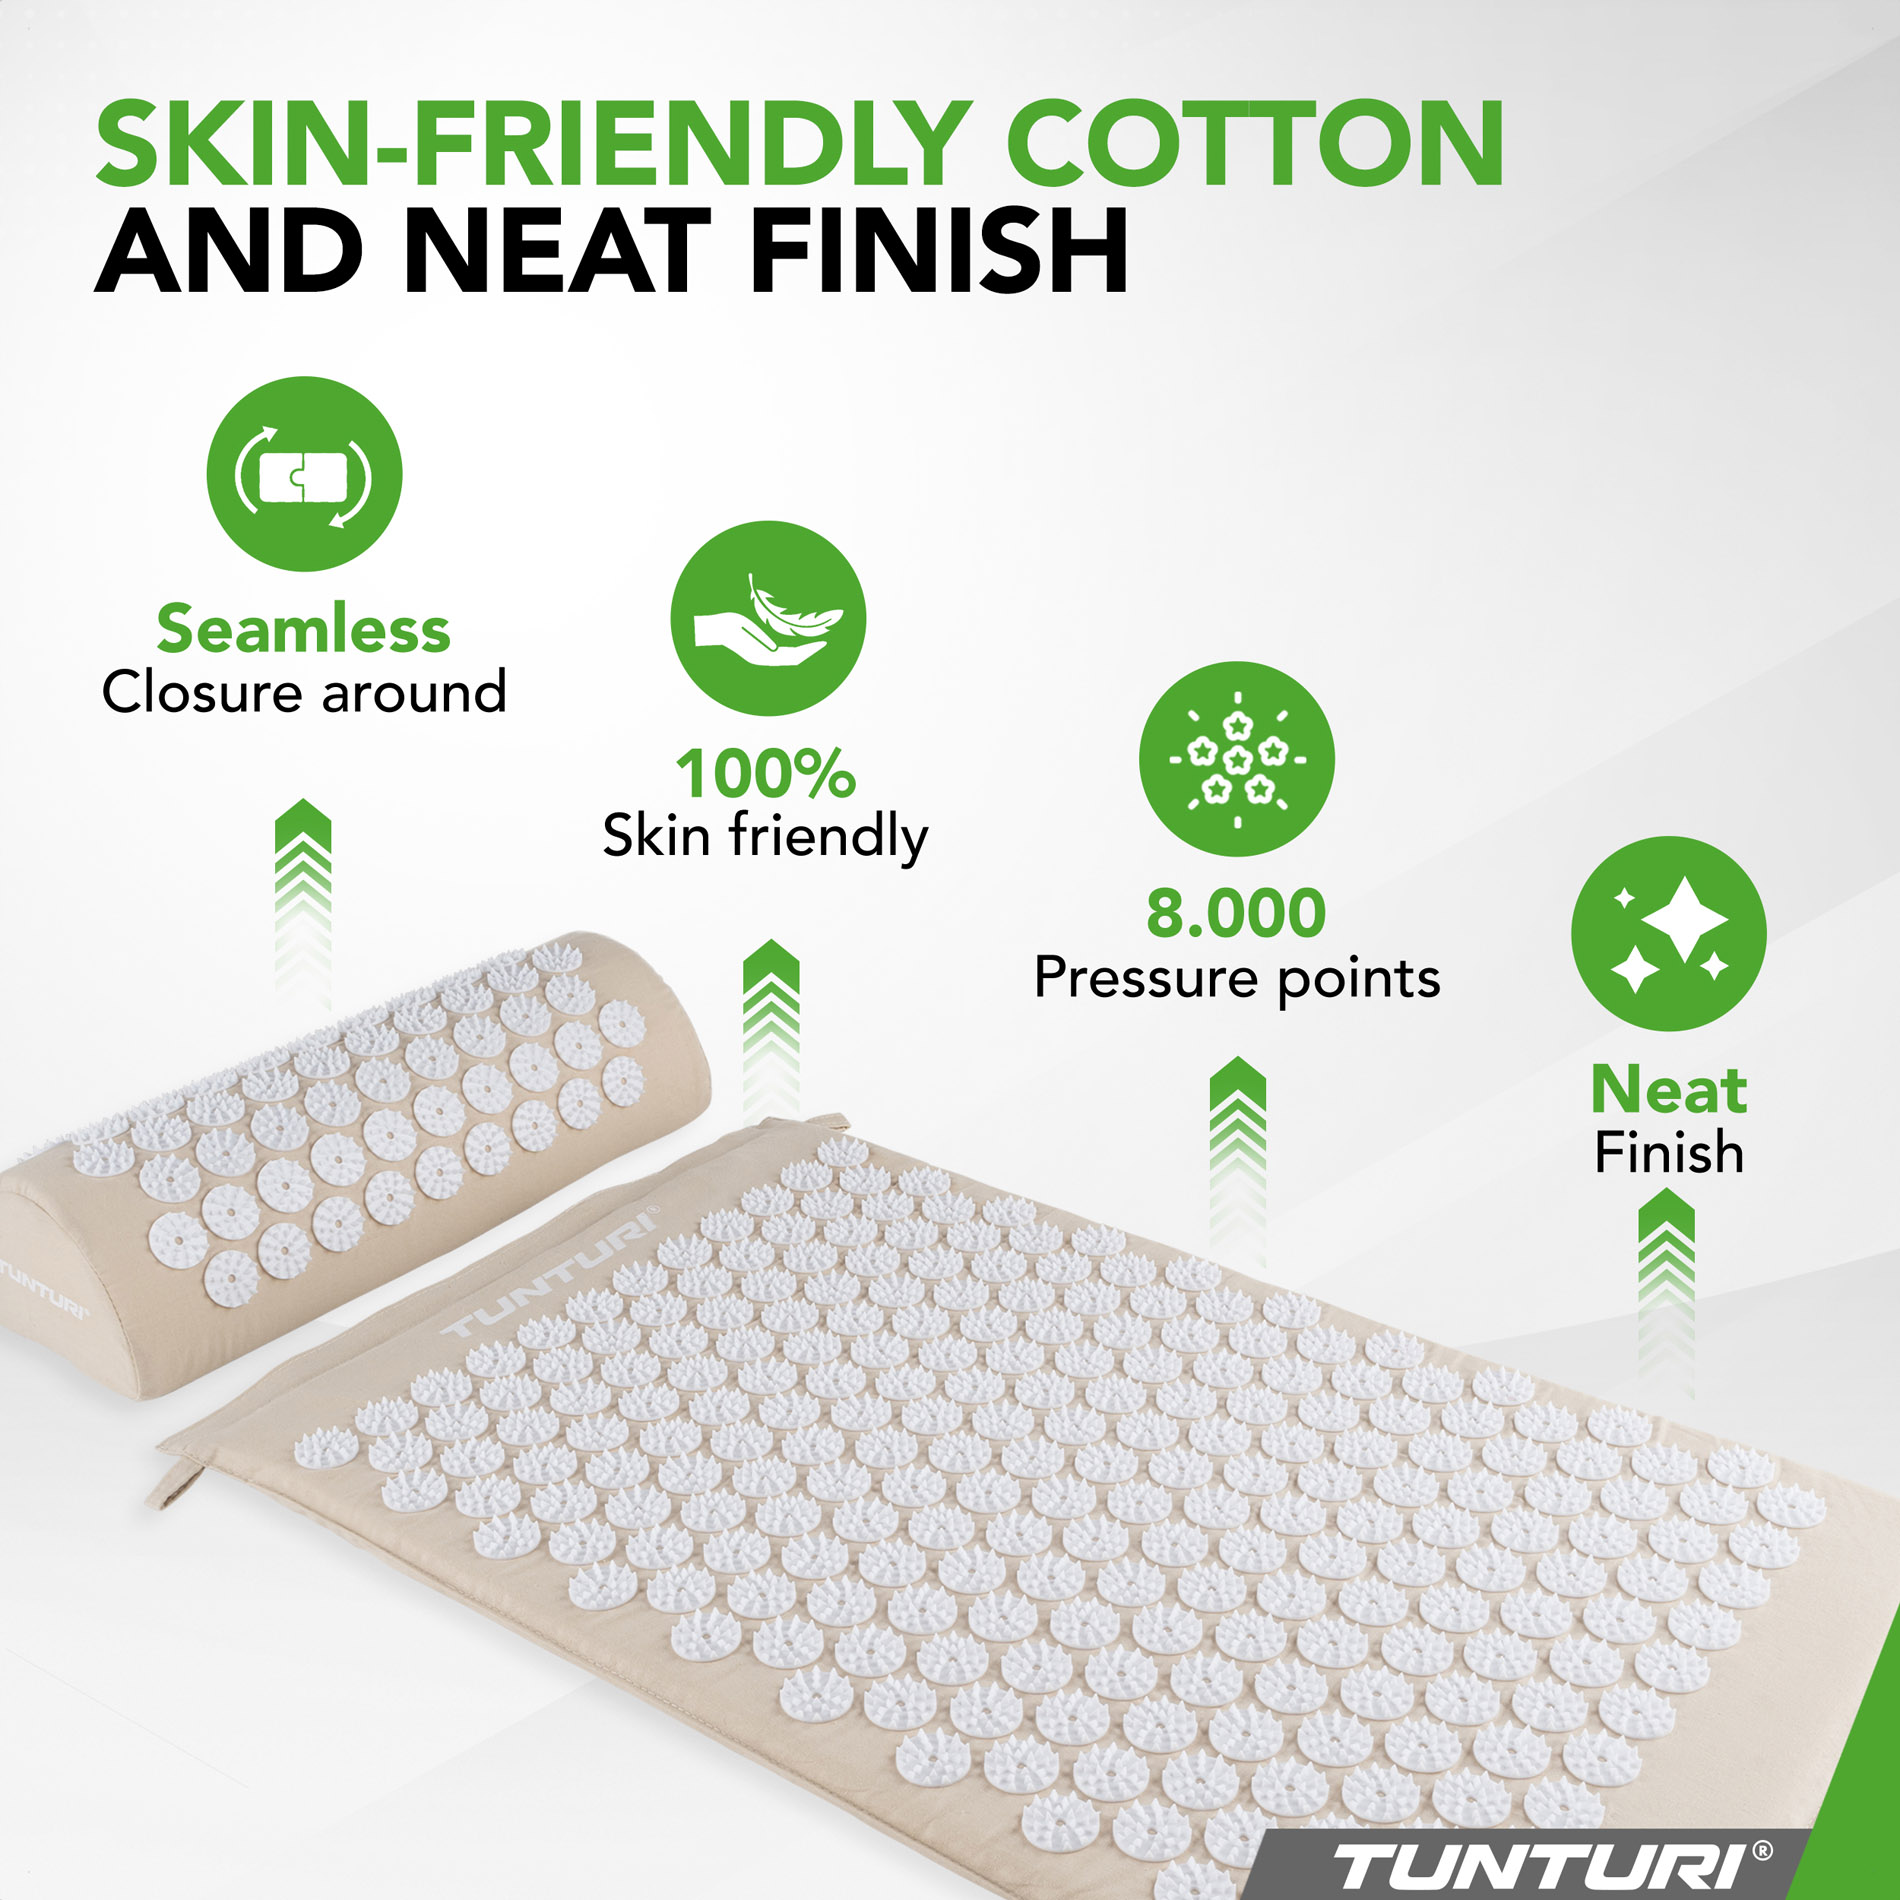 Acupressure Mat And Pillow